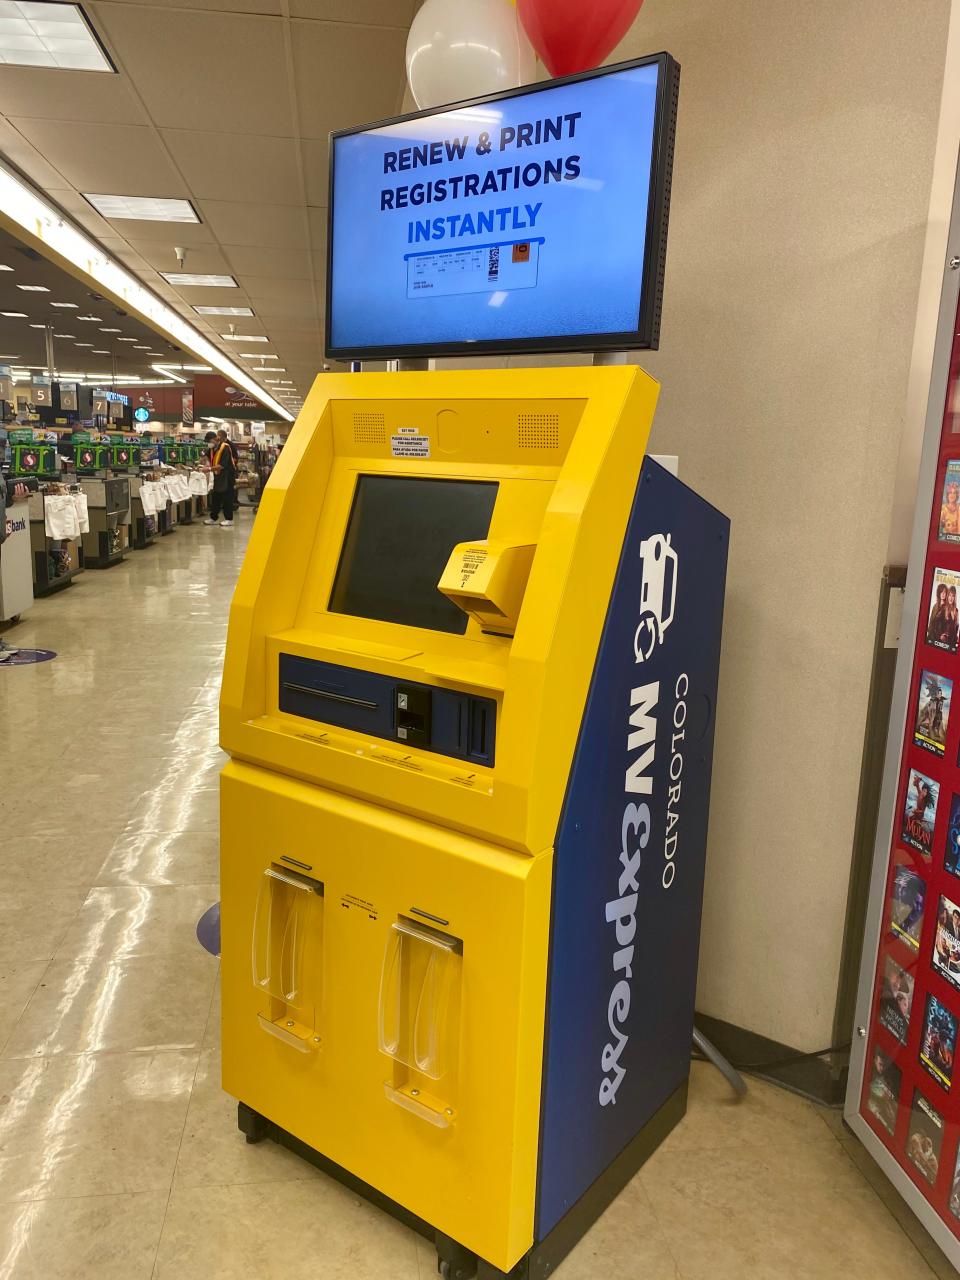 This self-serve kiosk was installed in 2021 at a grocery store in Pueblo, Colorado, to allow people to renew their vehicle license plates. The North Carolina Division of Motor Vehicles plans to put similar kiosks in North Carolina grocery stores and other locations starting in October for people to renew their driver’s licenses and vehicle license plates.